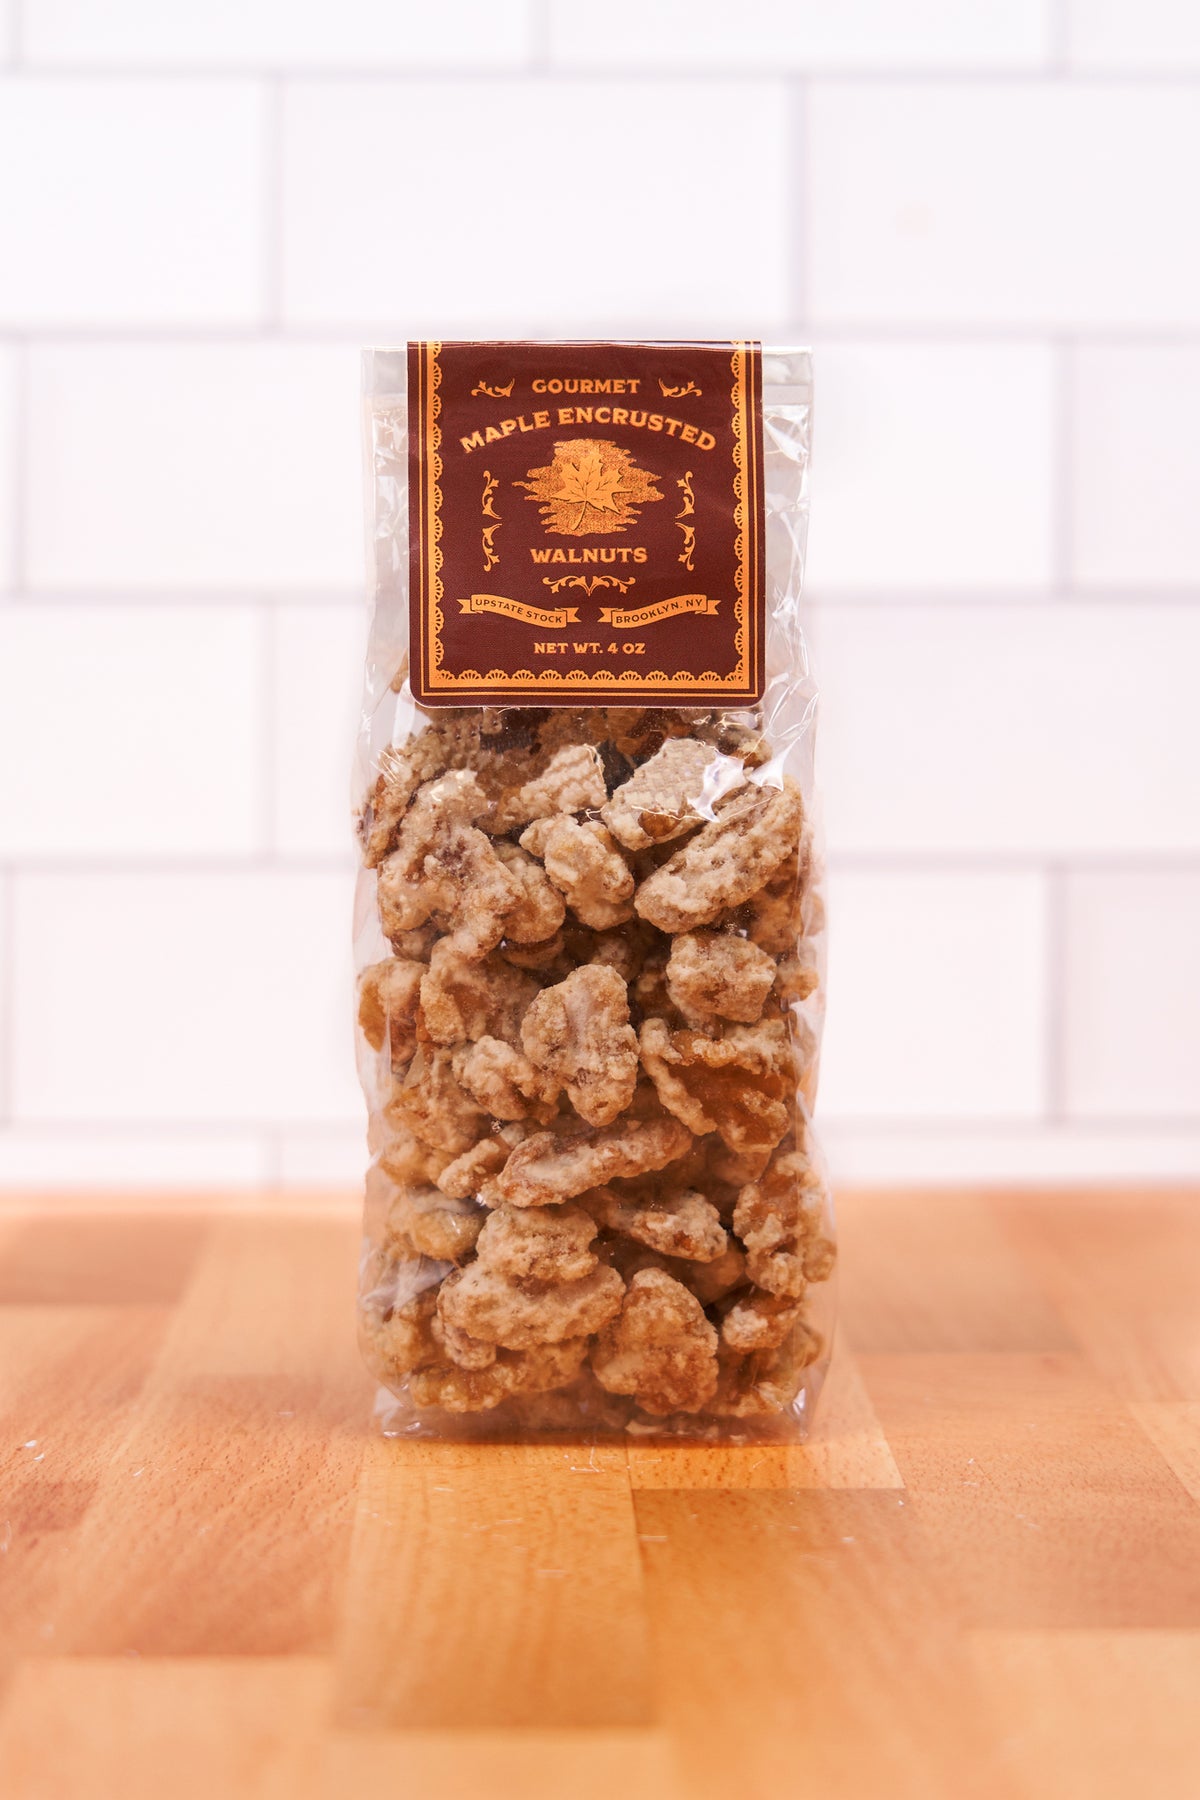 Upstate Stock Maple Collection - ALMONDS, CASHEWS, PEANUTS, and WALNUTS